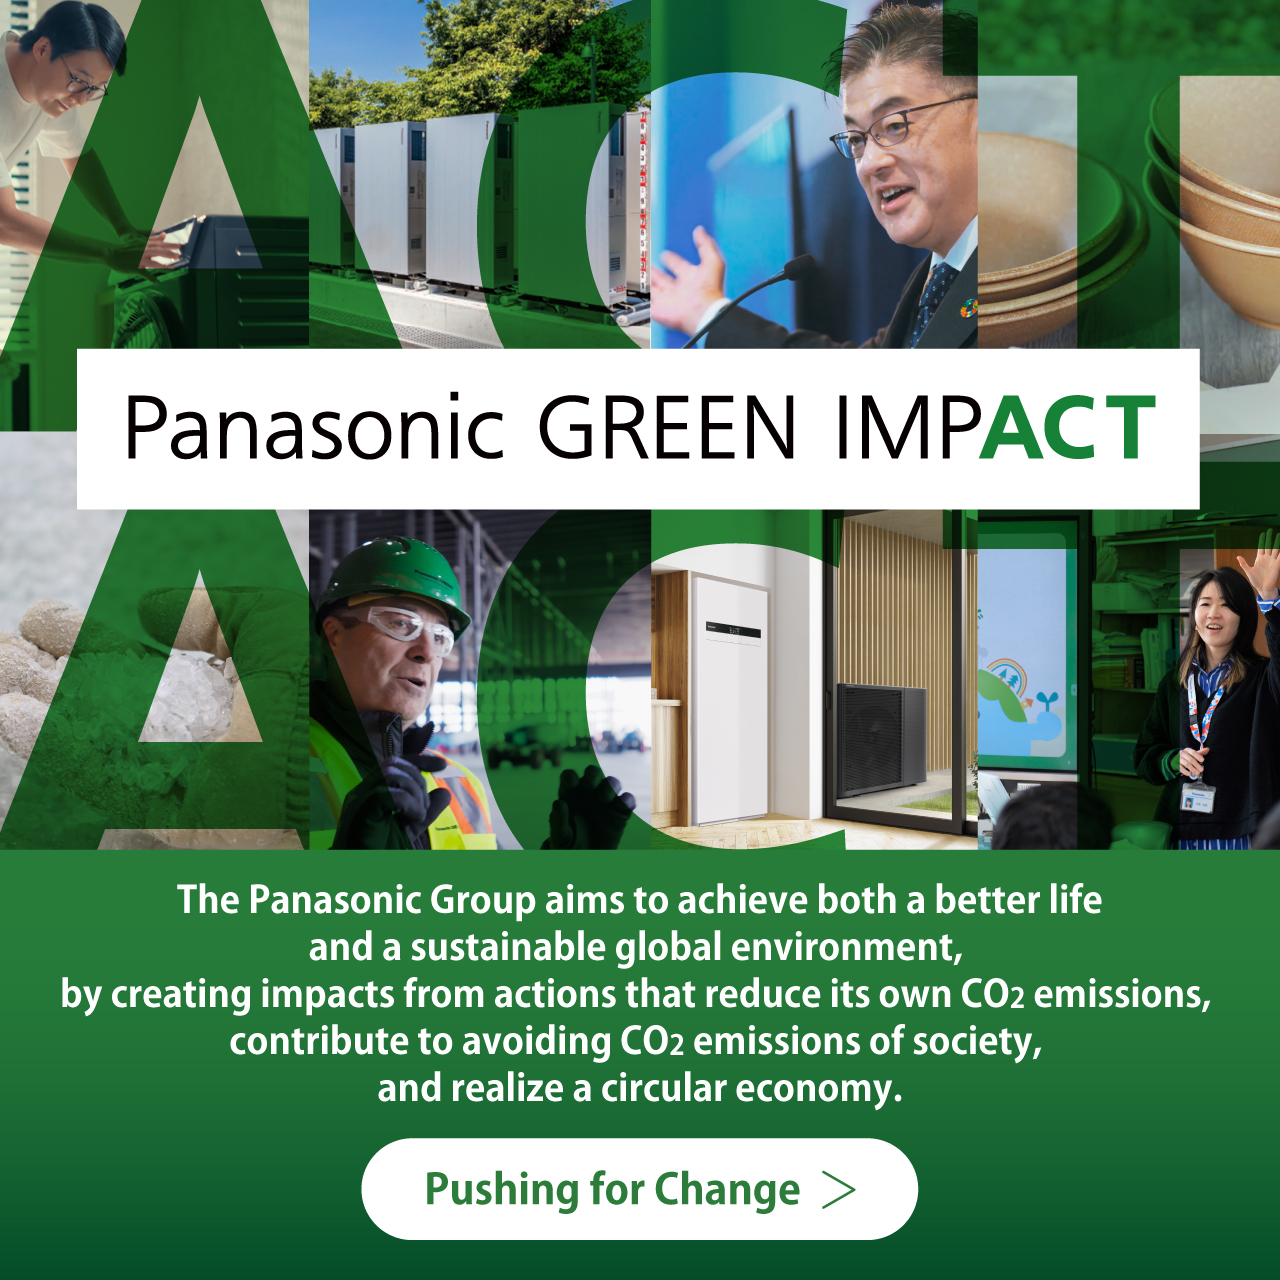 Panasonic GREEN IMPACT The Panasonic Group aims to achieve both a better life and a sustainable global environment, by creating impacts from actions that reduce our own CO2 emissions, contribute to avoiding CO2 emissions of society, and realize a circular economy. Pushing for Change